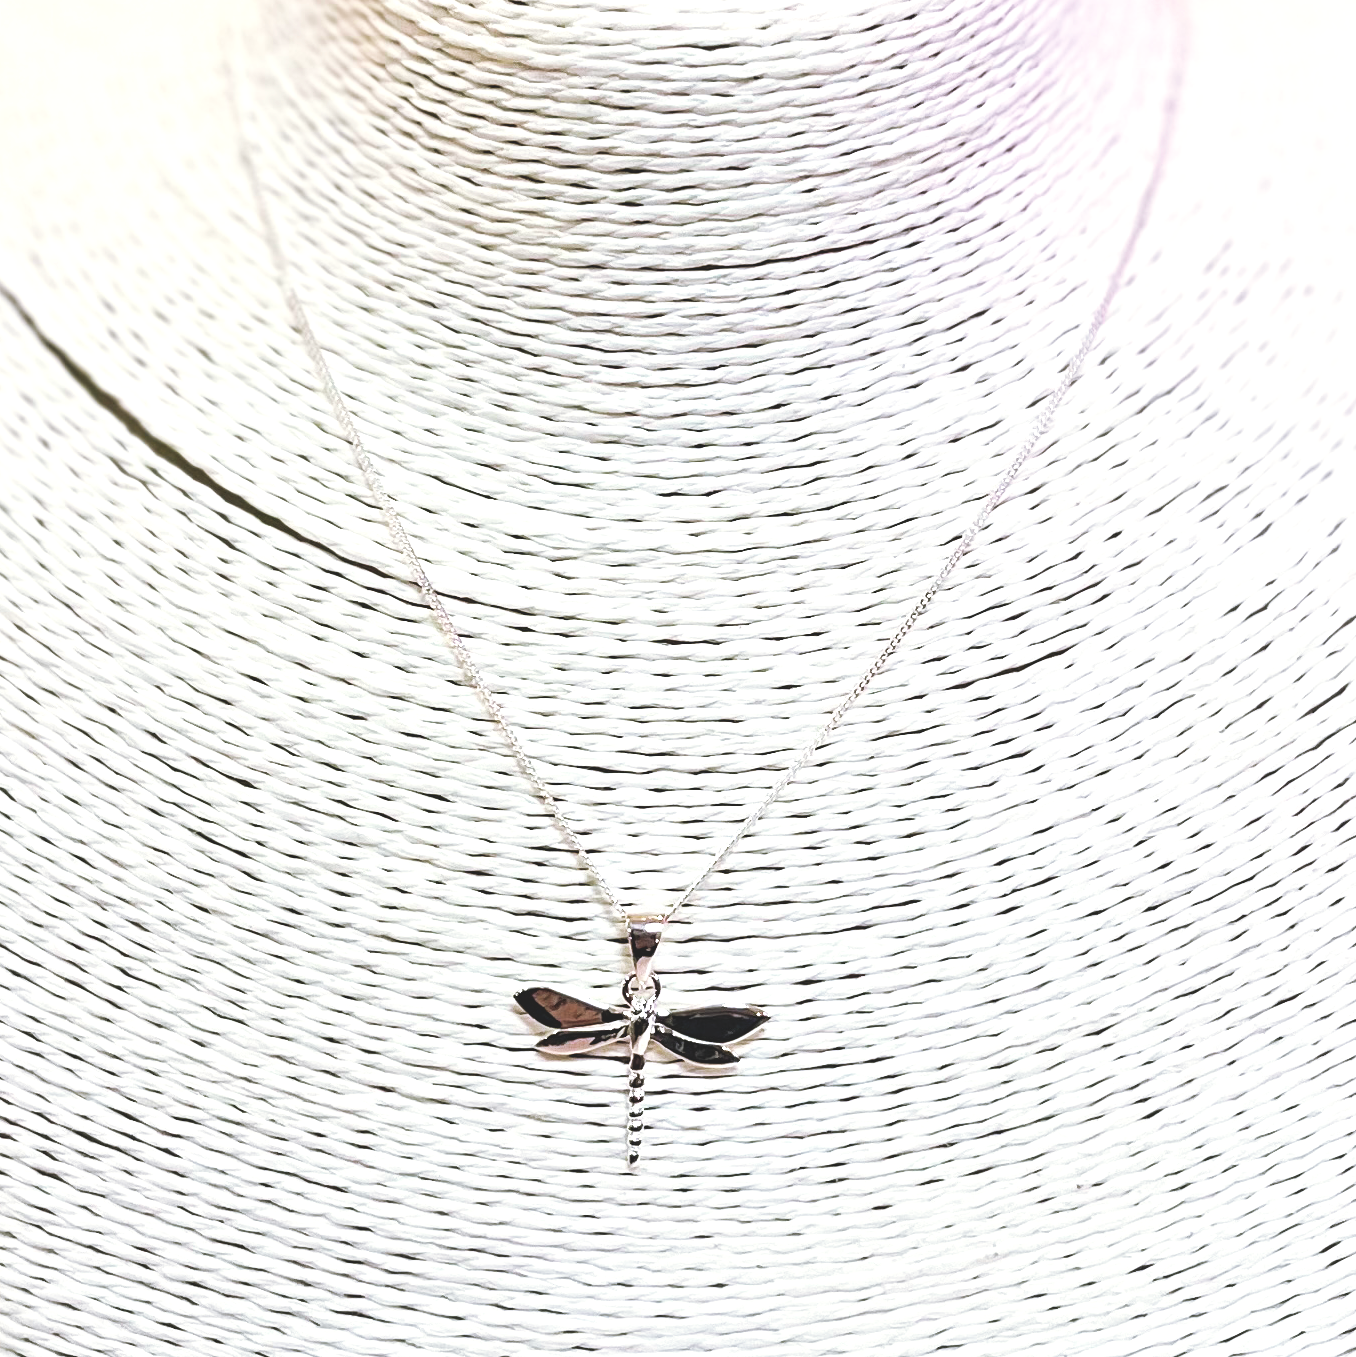 Dragonfly Pendant Sterling Silver Necklace